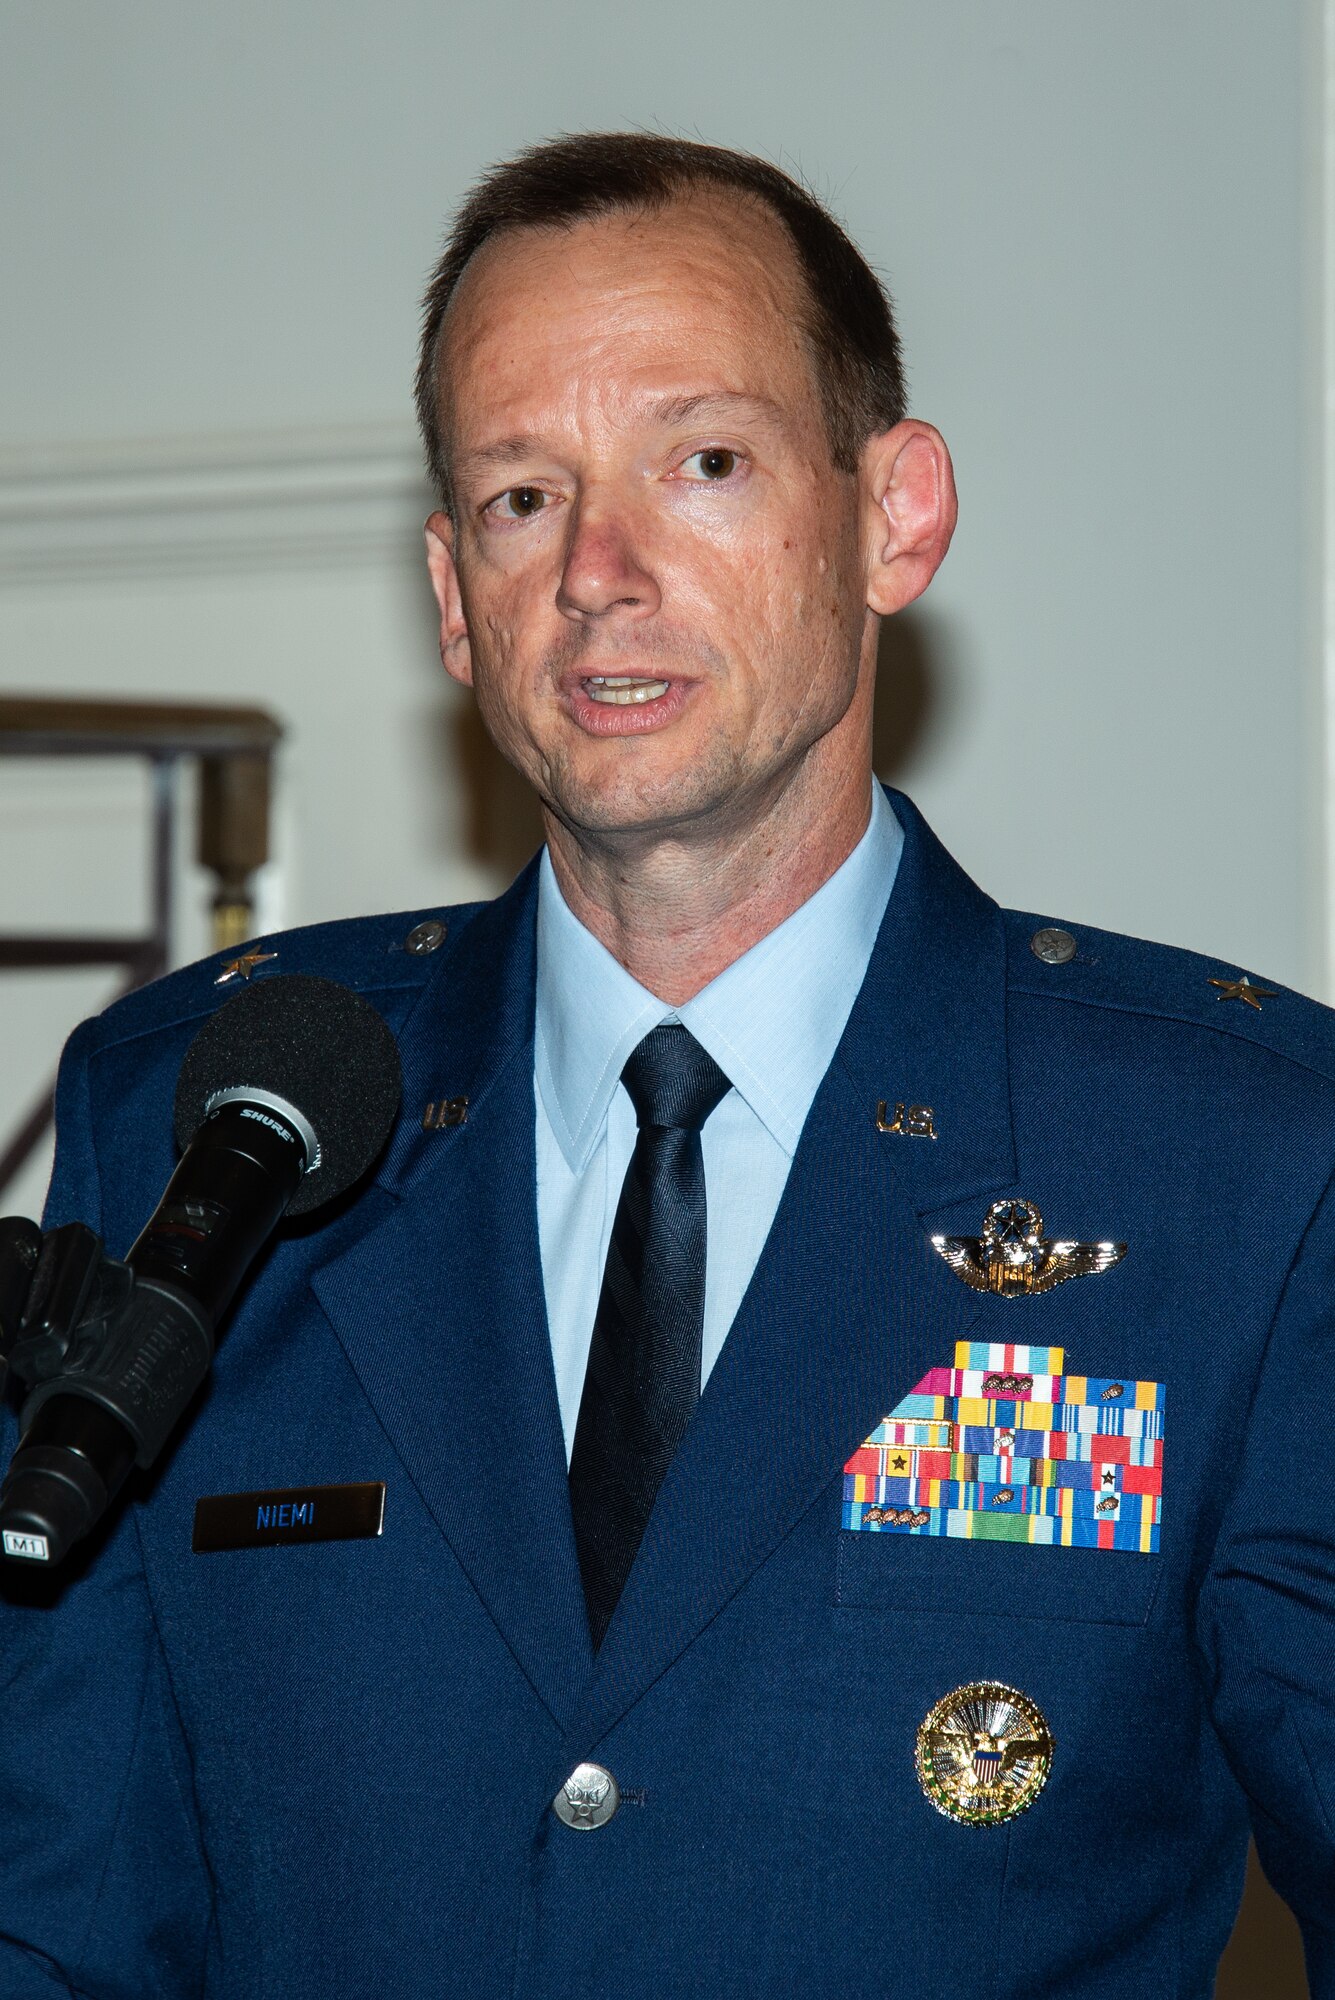 Maxwell AFB, Ala. - Brigadier General Christopher J. Niemi, commander of the Jeanne M. Holm Center for Officer Accessions and Citizen Development makes remarks during his change of command ceremony, August 23, 2018. As head of the Air Force’s largest officer accessioning source, Niemi leads more than 3,200 Airmen and is responsible for the training and development of 163,000 cadets at 2,140 global locations. (US Air Force photo by Melanie Rodgers Cox)